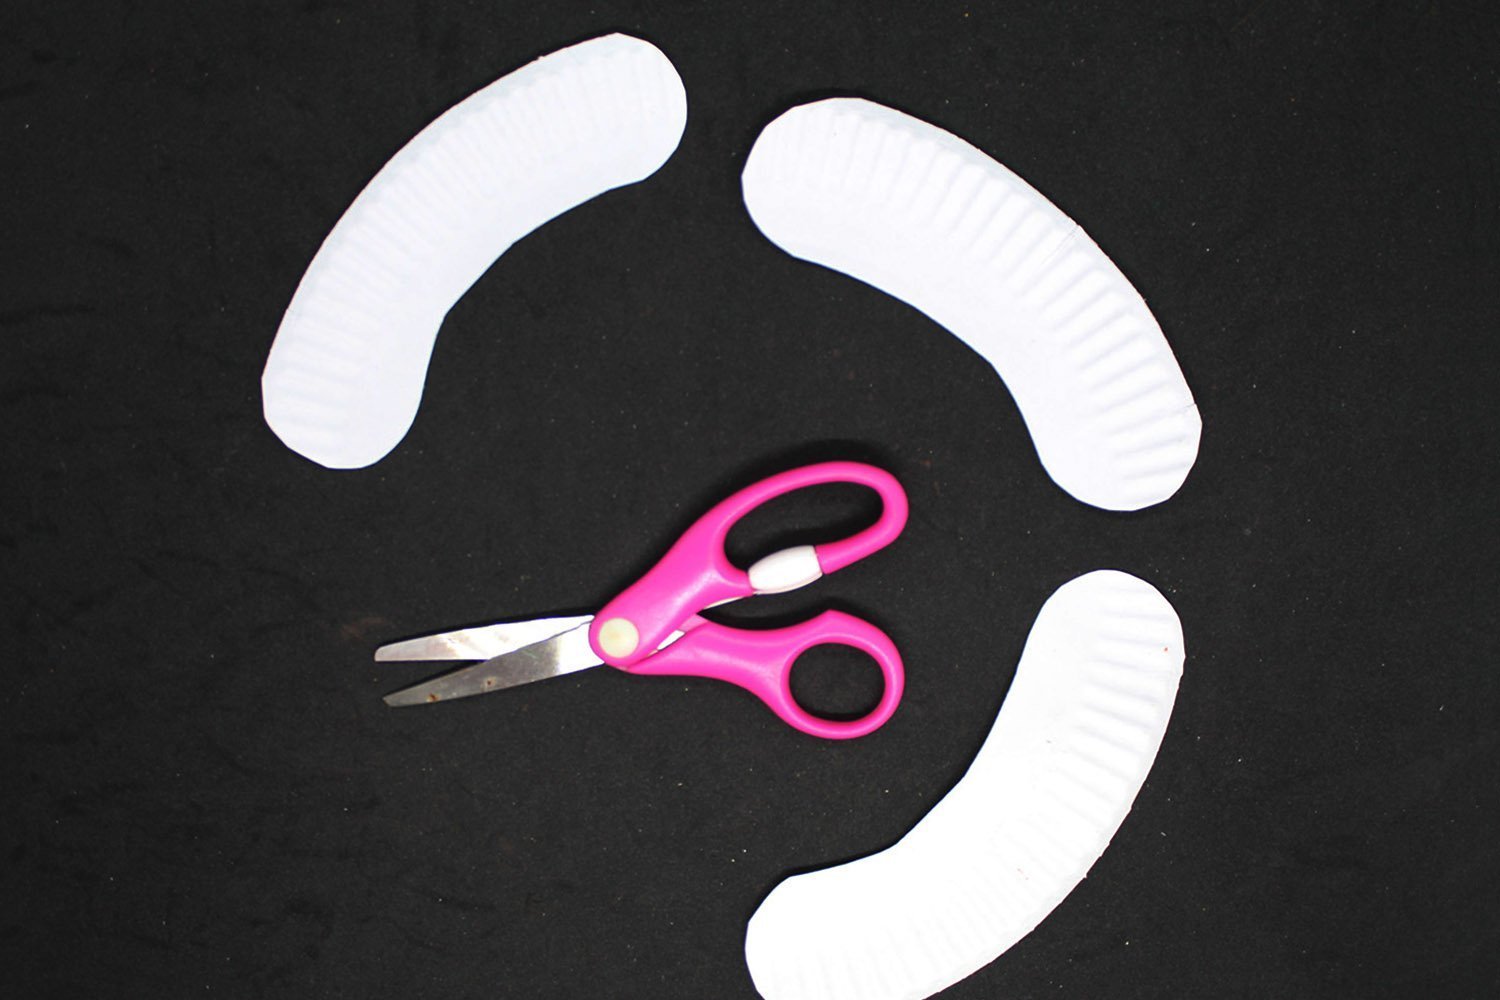 How to Make a Paper Plate Snake - Step 7